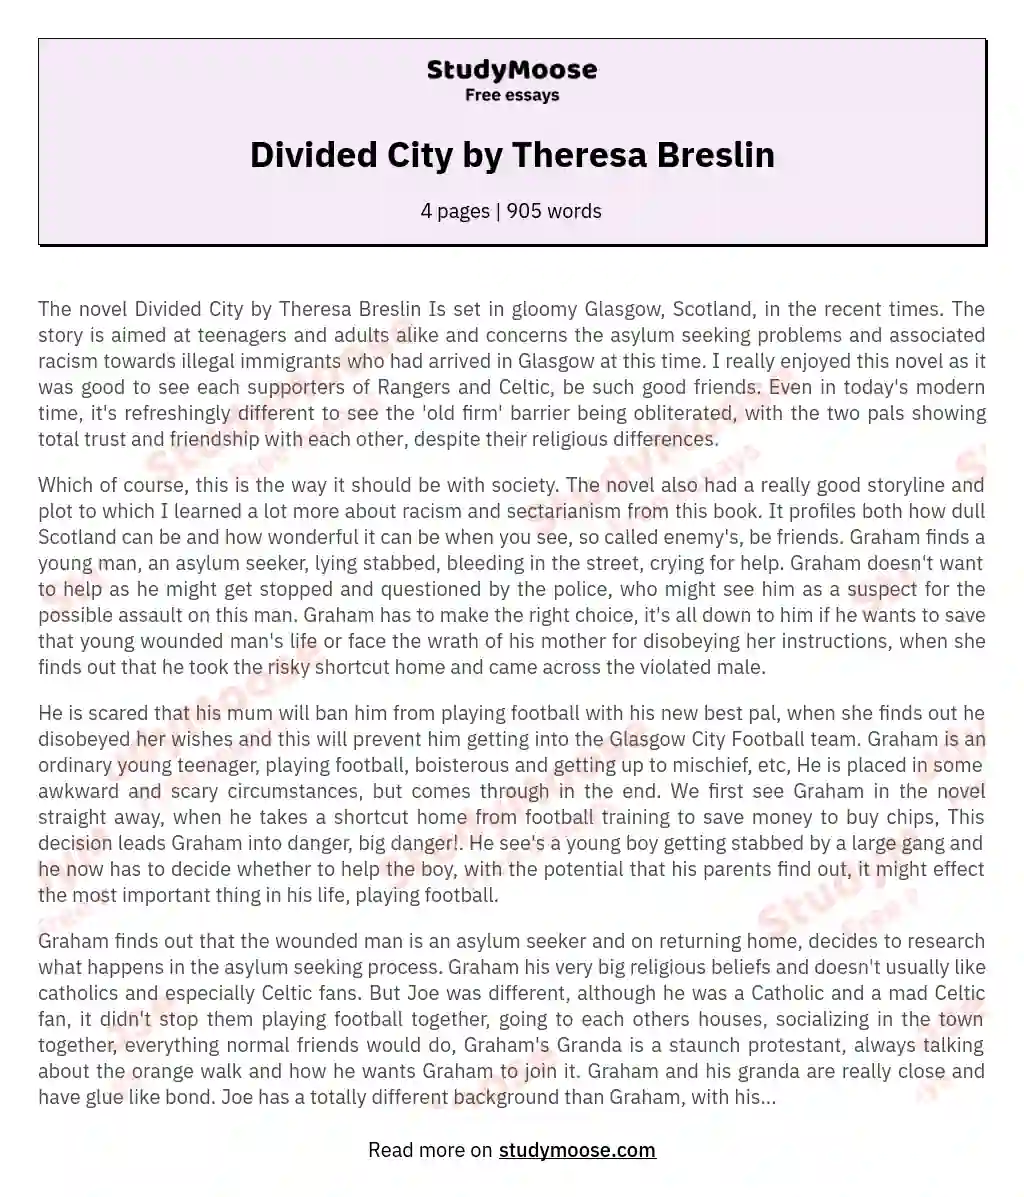 Divided City by Theresa Breslin essay